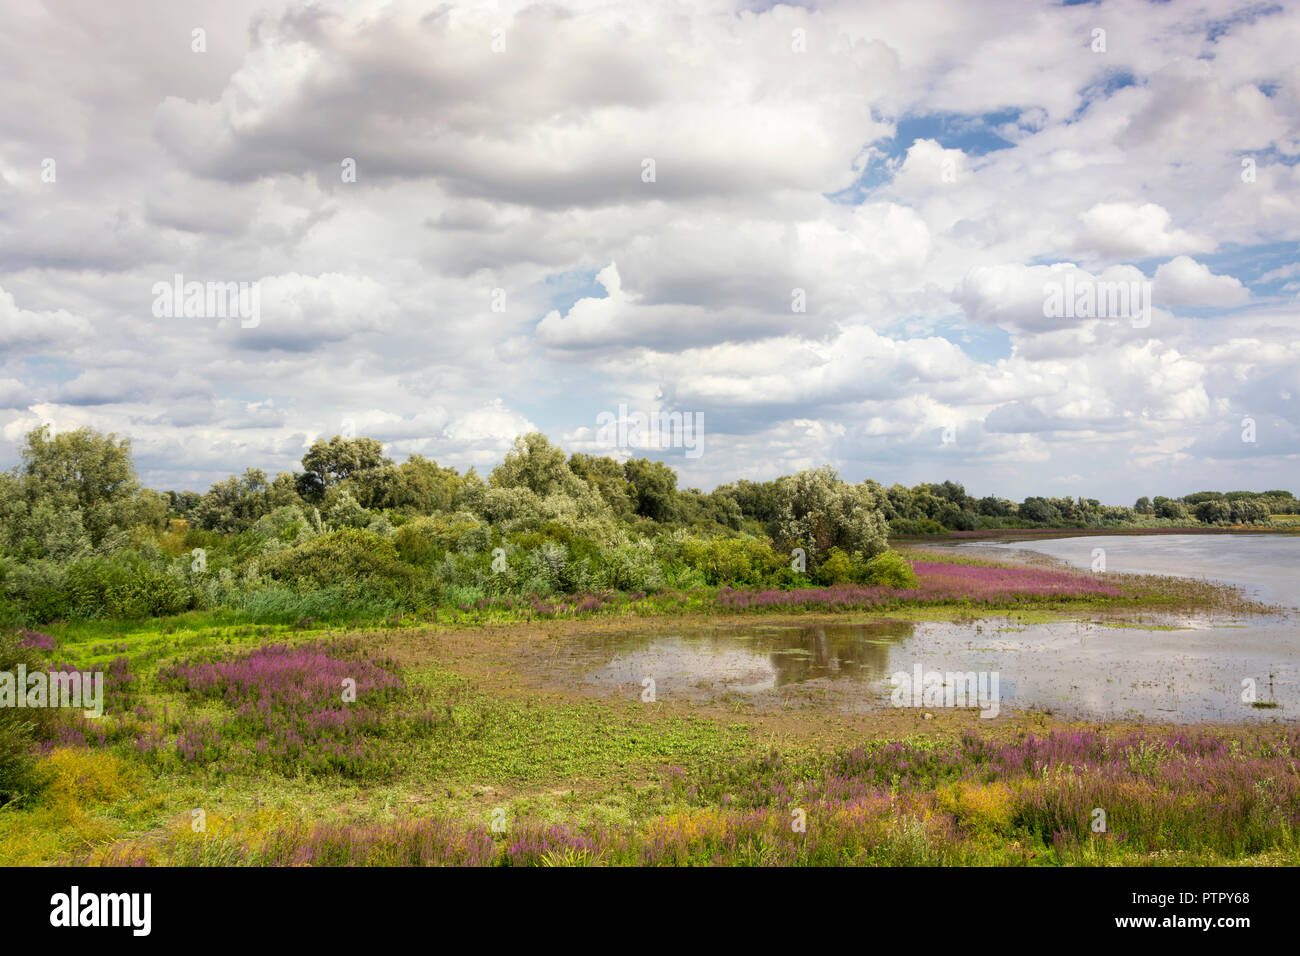 Beautiful scenic view on the area of the Groenlanden and the Oude Waal in the Ooijpolder near Nijmegen. Clouds, sunshine, vegetation and water. Stock Photo